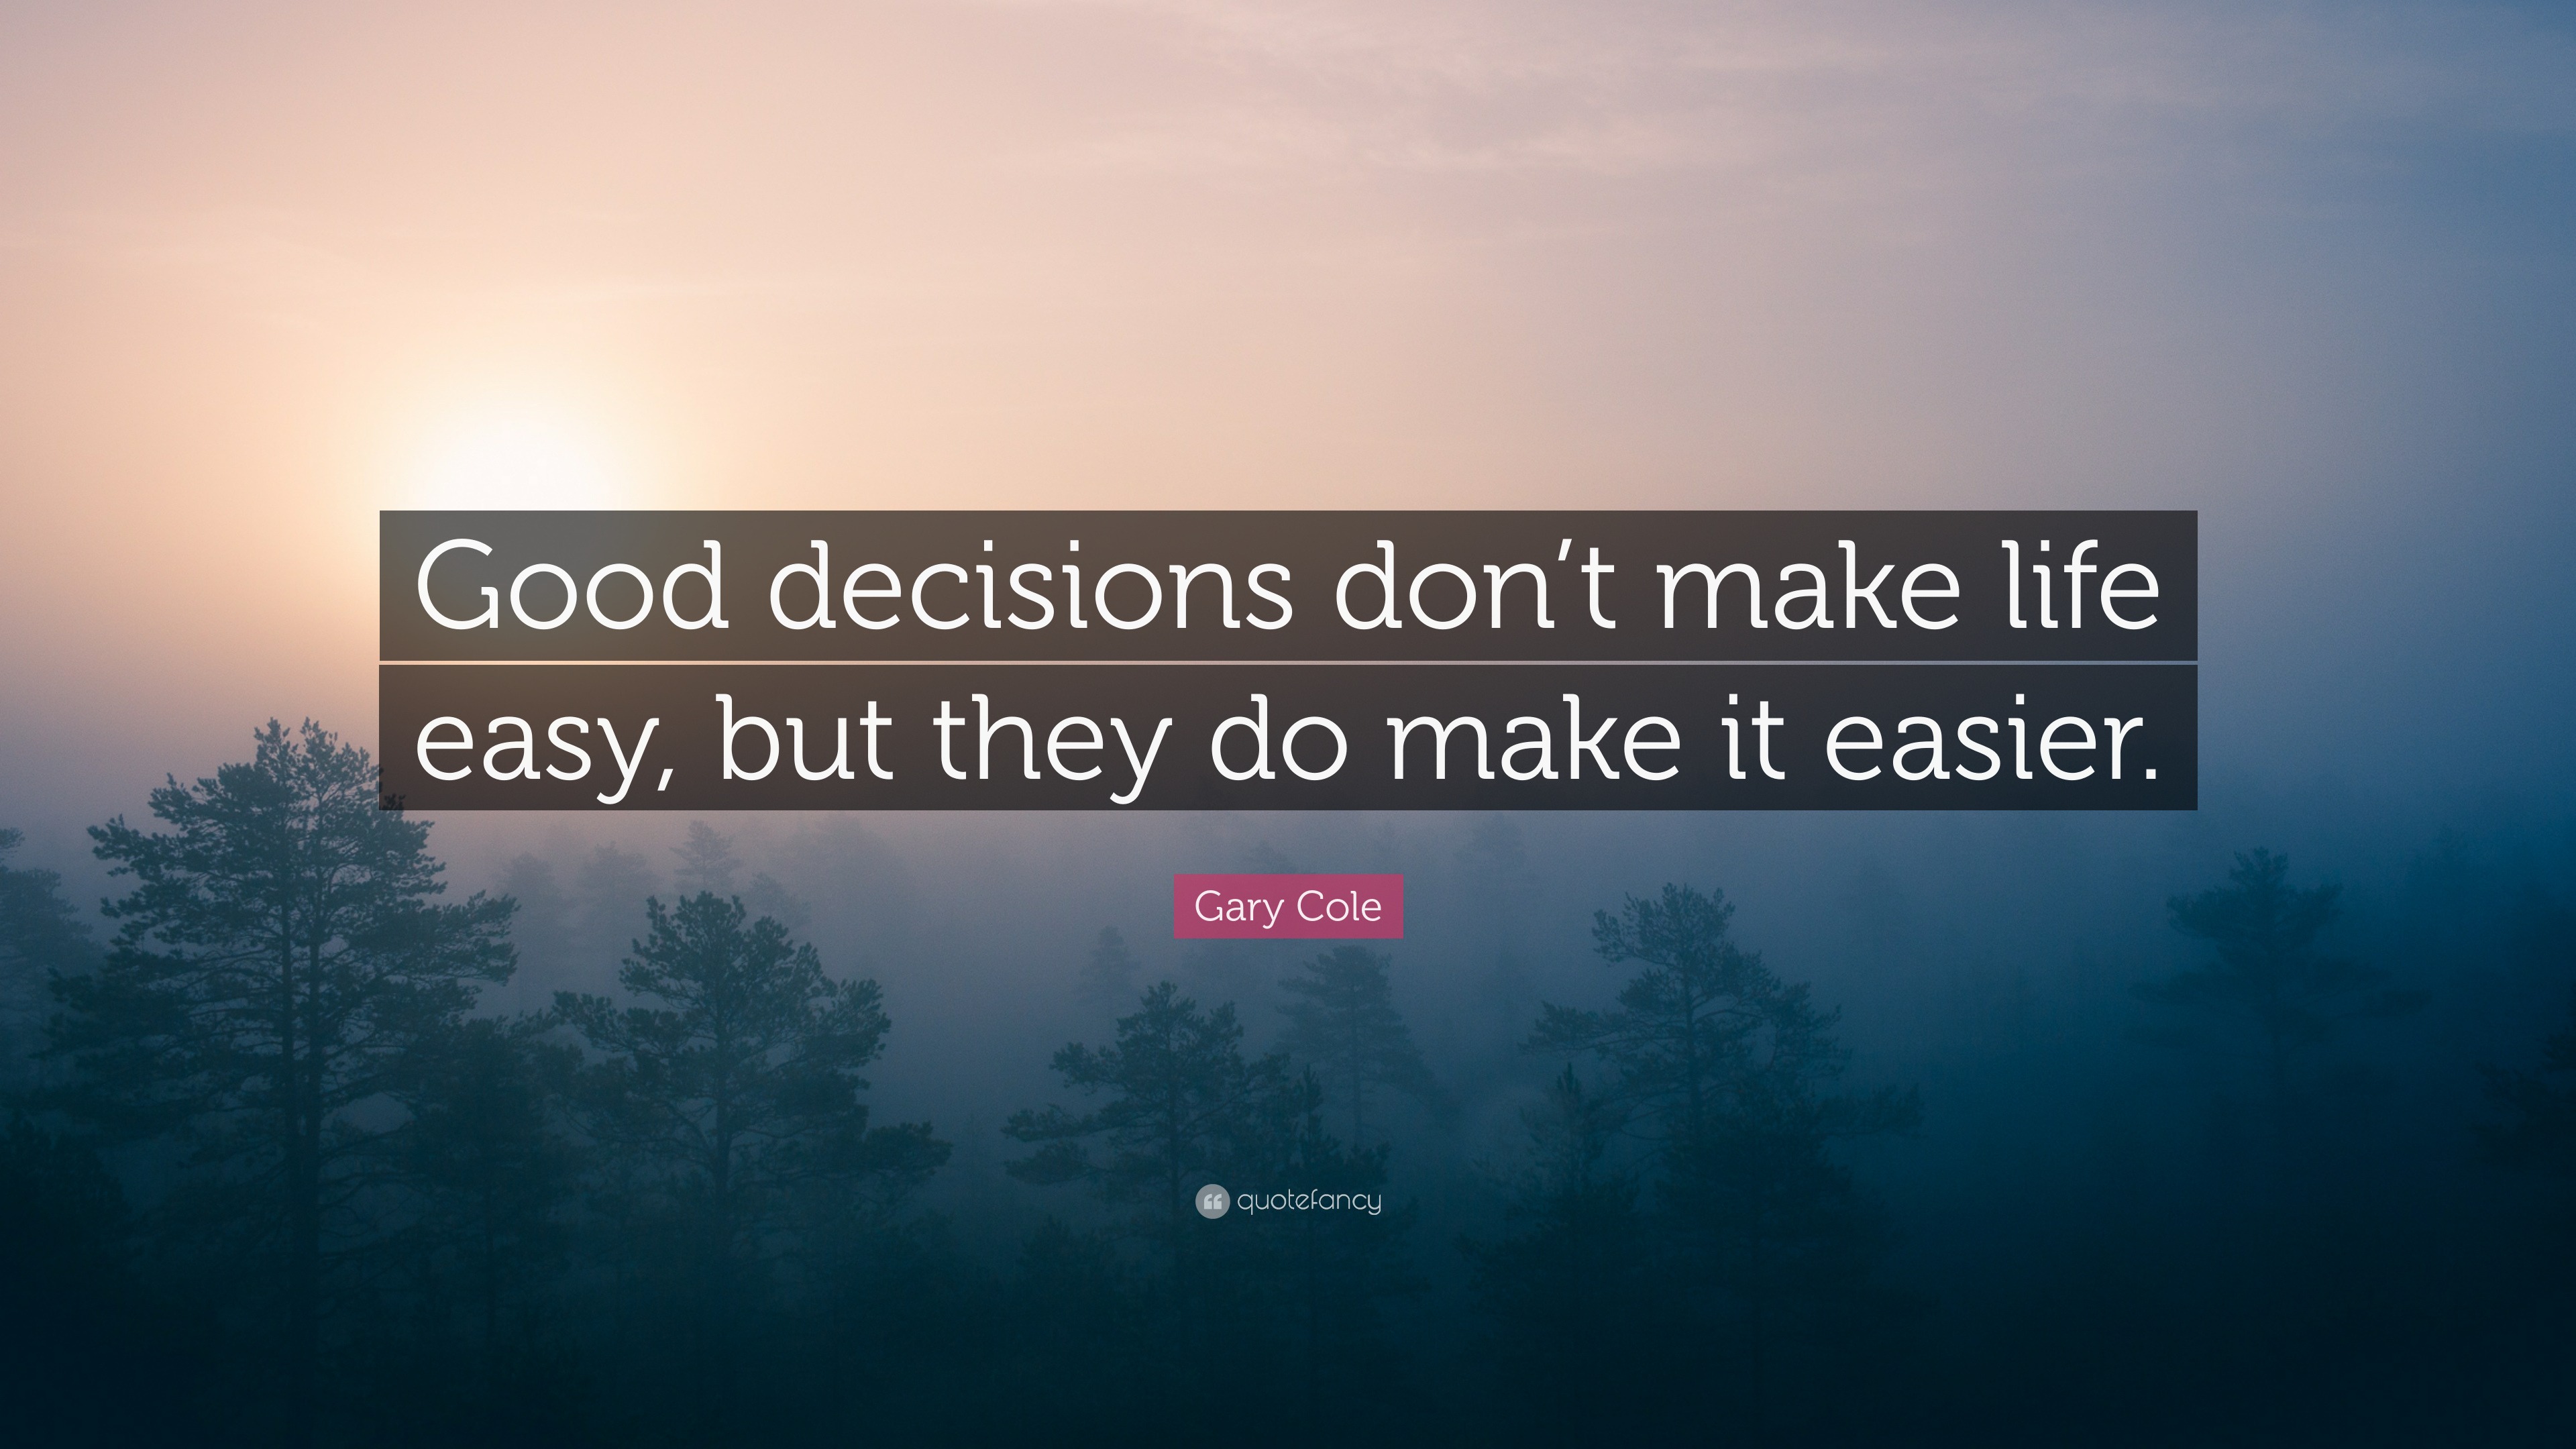 https://quotefancy.com/media/wallpaper/3840x2160/3034933-Gary-Cole-Quote-Good-decisions-don-t-make-life-easy-but-they-do.jpg